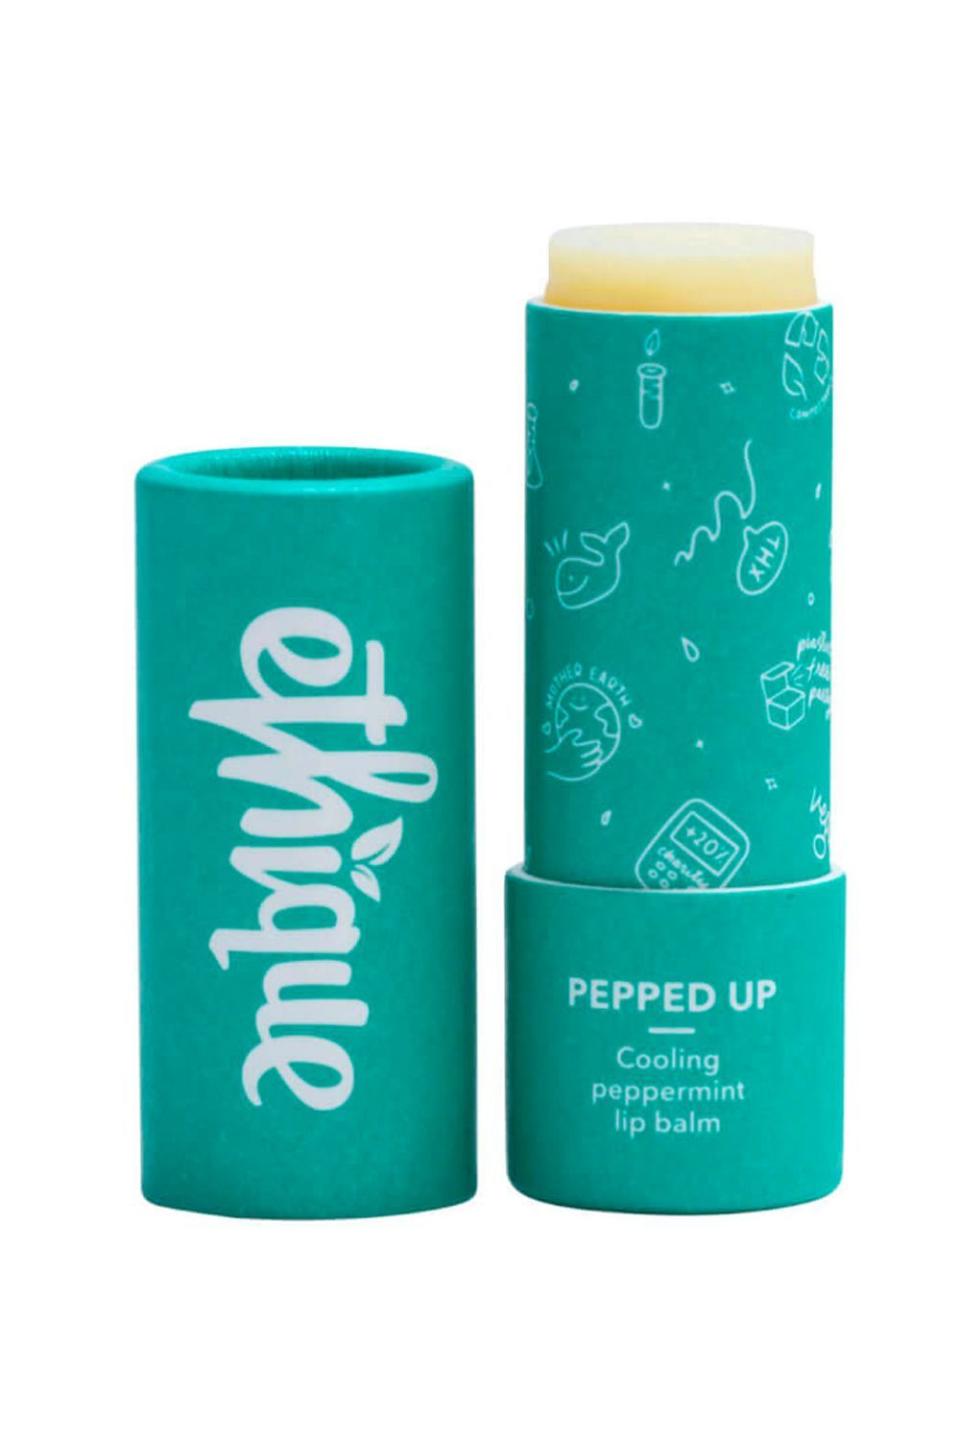 4) Ethique Pepped Up Cooling Peppermint Lip Balm